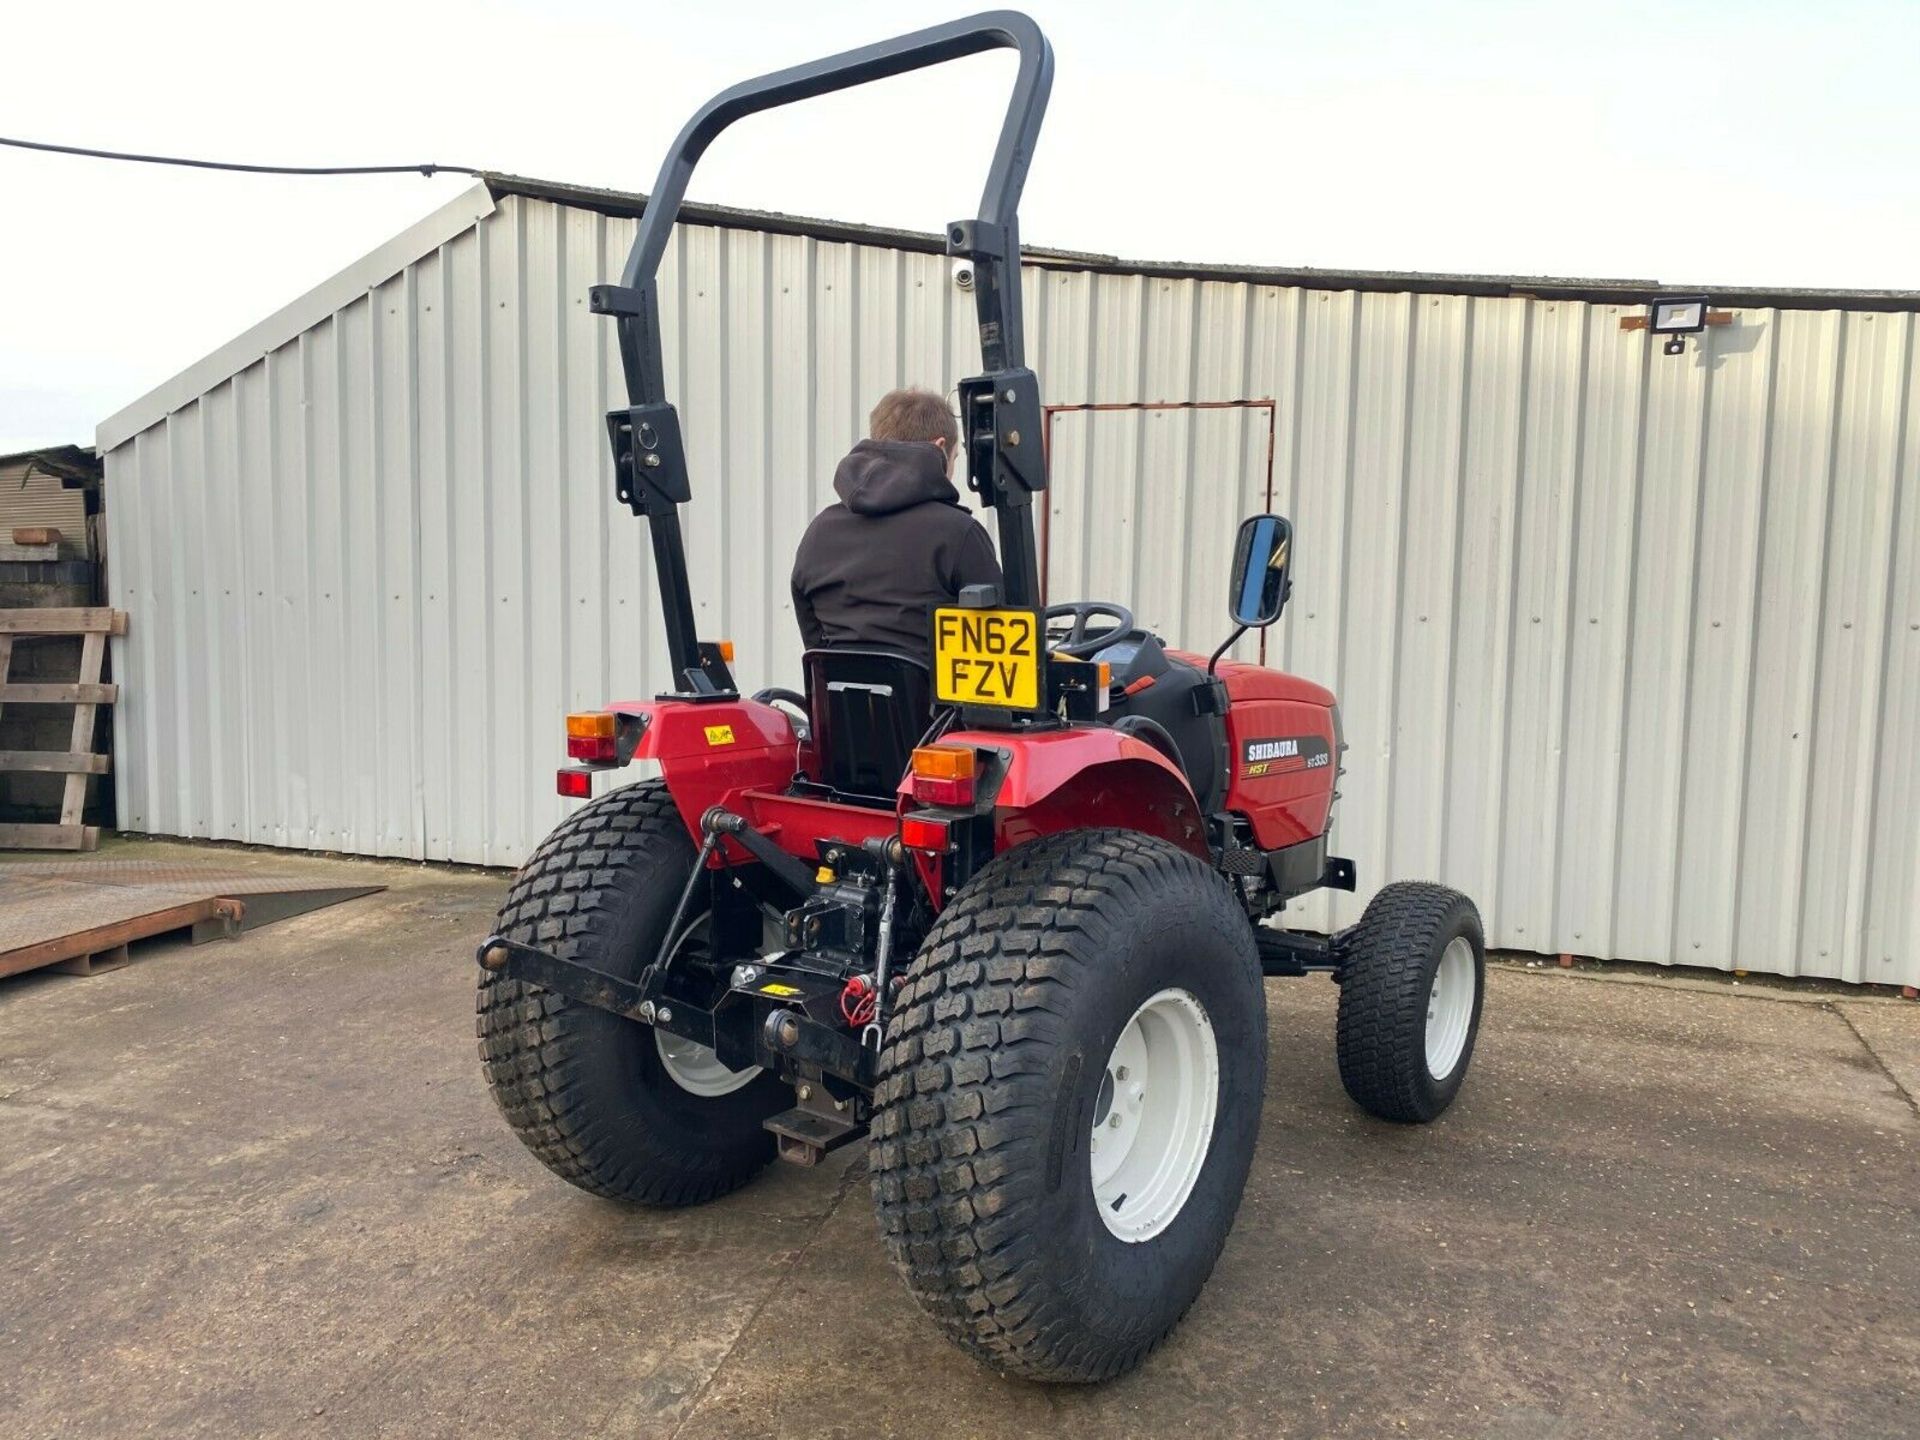 COMPACT TRACTOR SHIBAURA ST333, 33HP, 4 WHEEL DRIVE, YEAR 2012, ONLY 685 HOURS GENUINE FROM NEW - Image 8 of 9